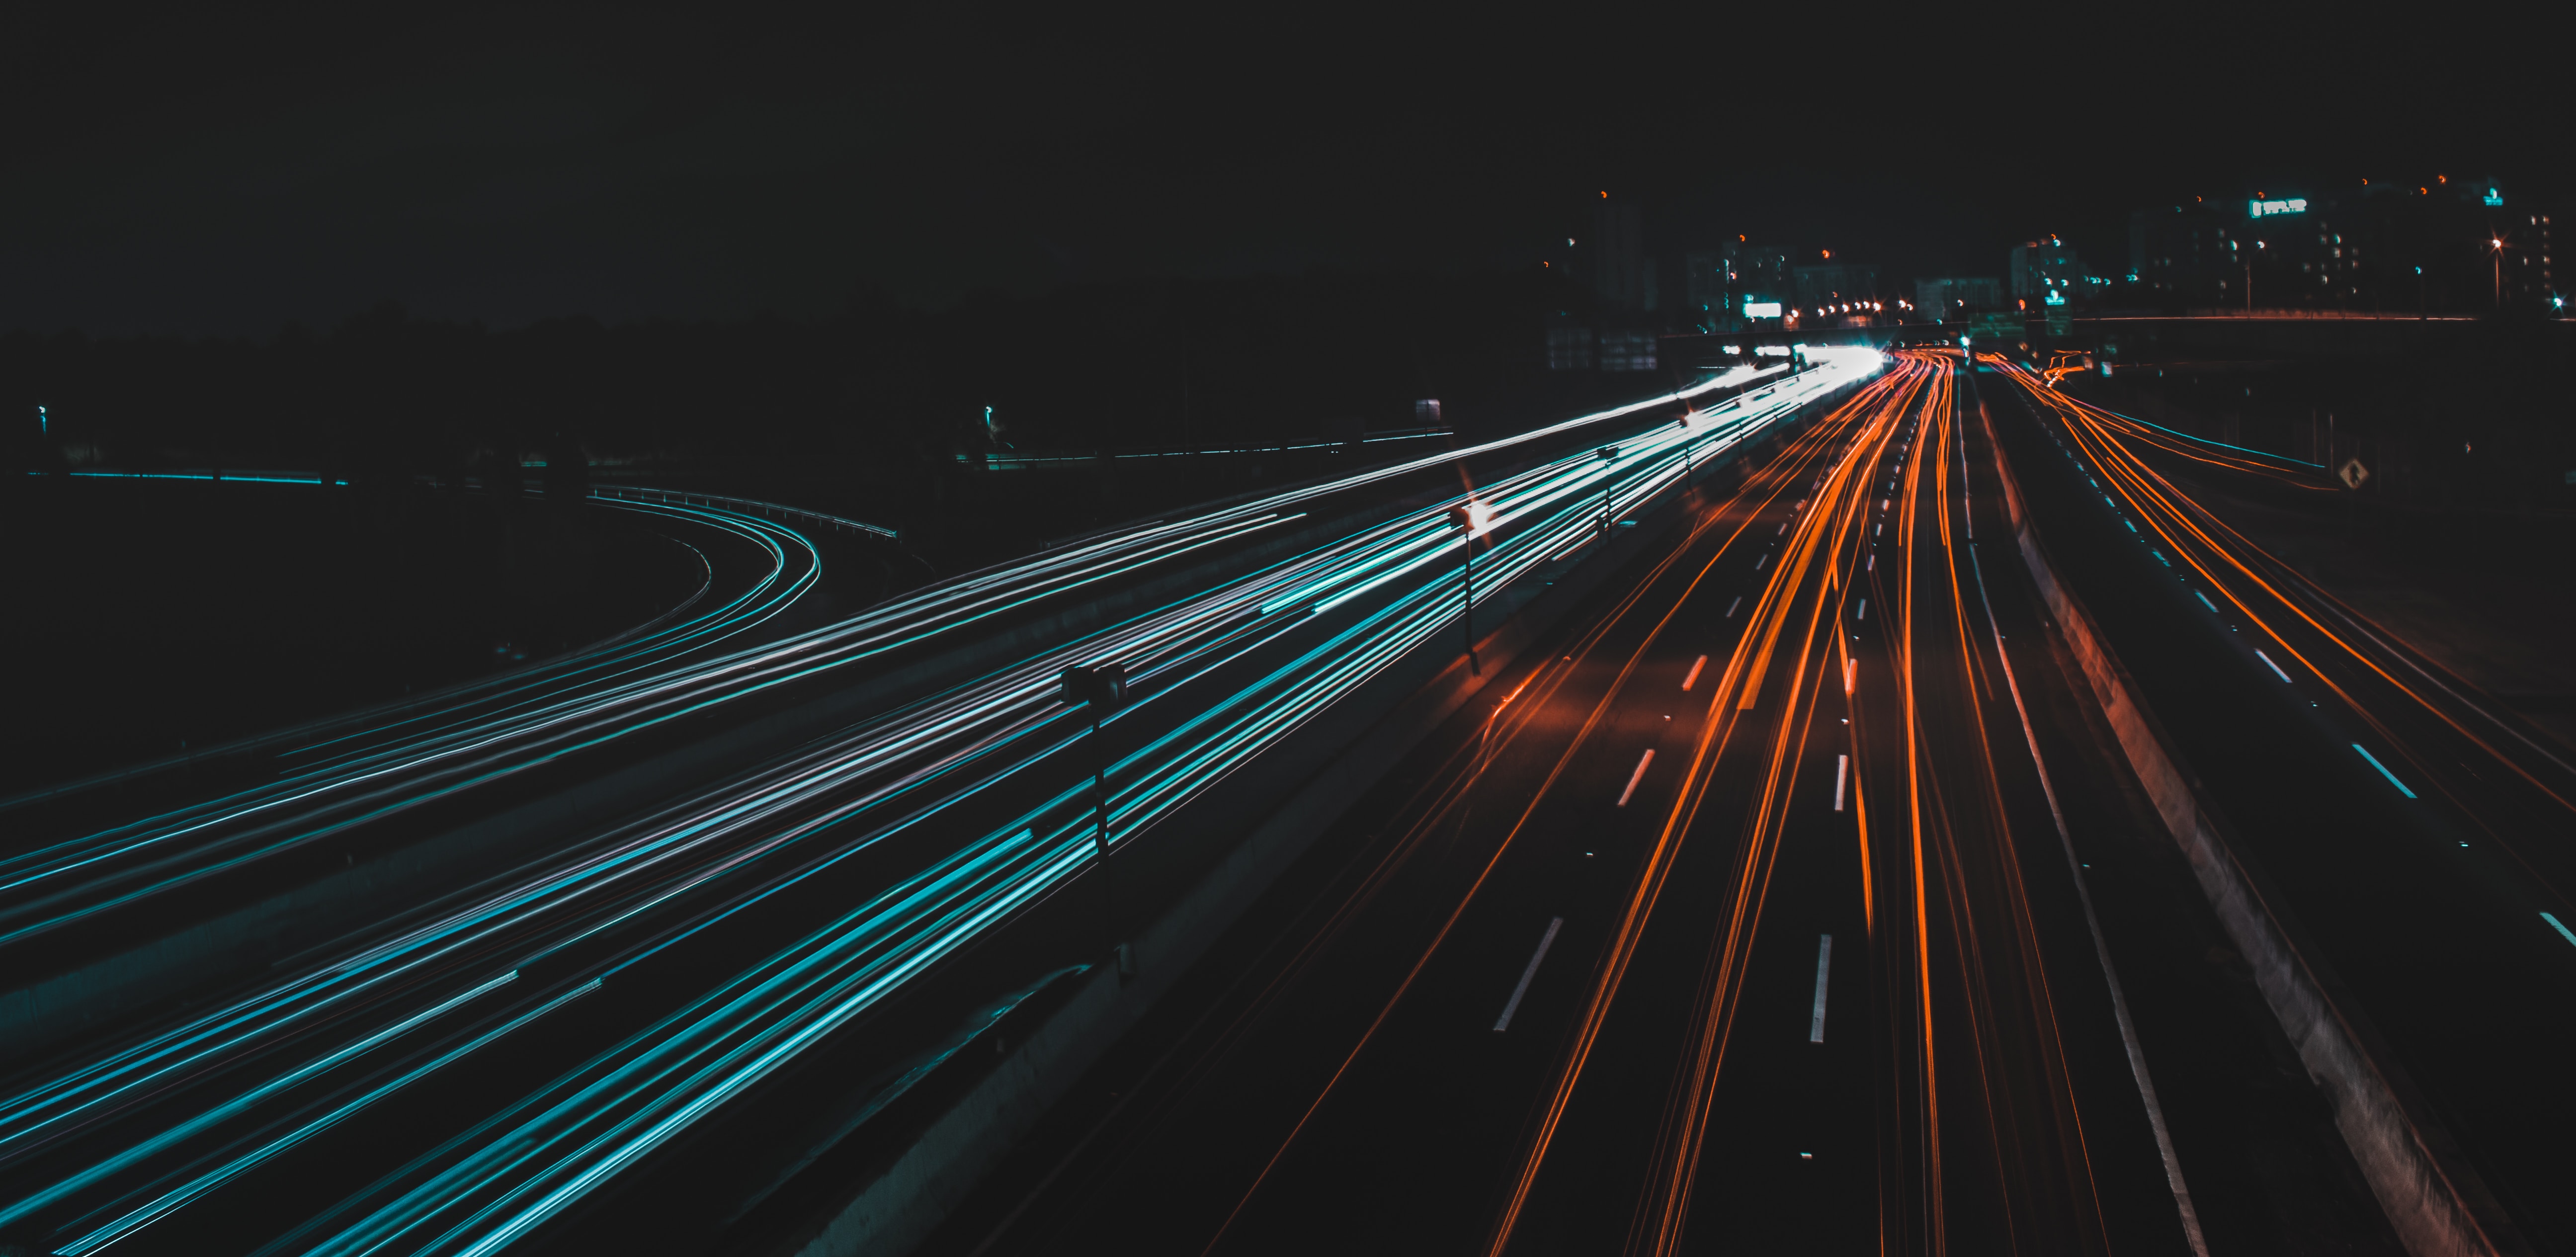 Long exposure of traffic on a highway with headlights and taillights blurred.